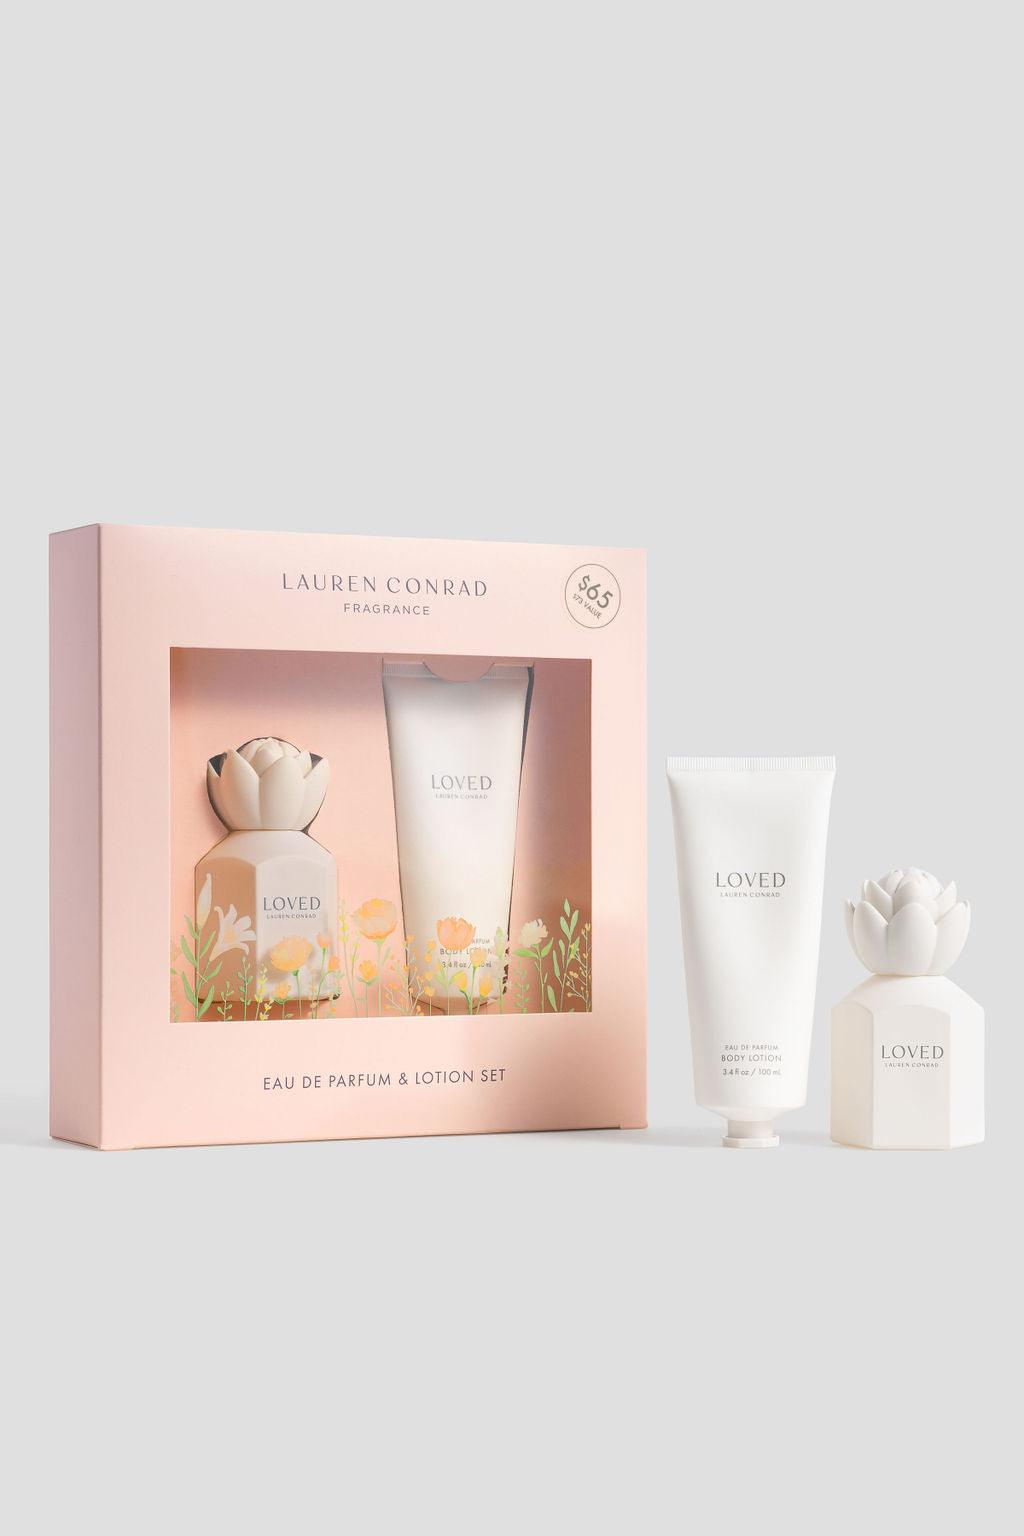 LOVED GIFT SET - Loved 50ml eau de parfum and 100 ml body lotion